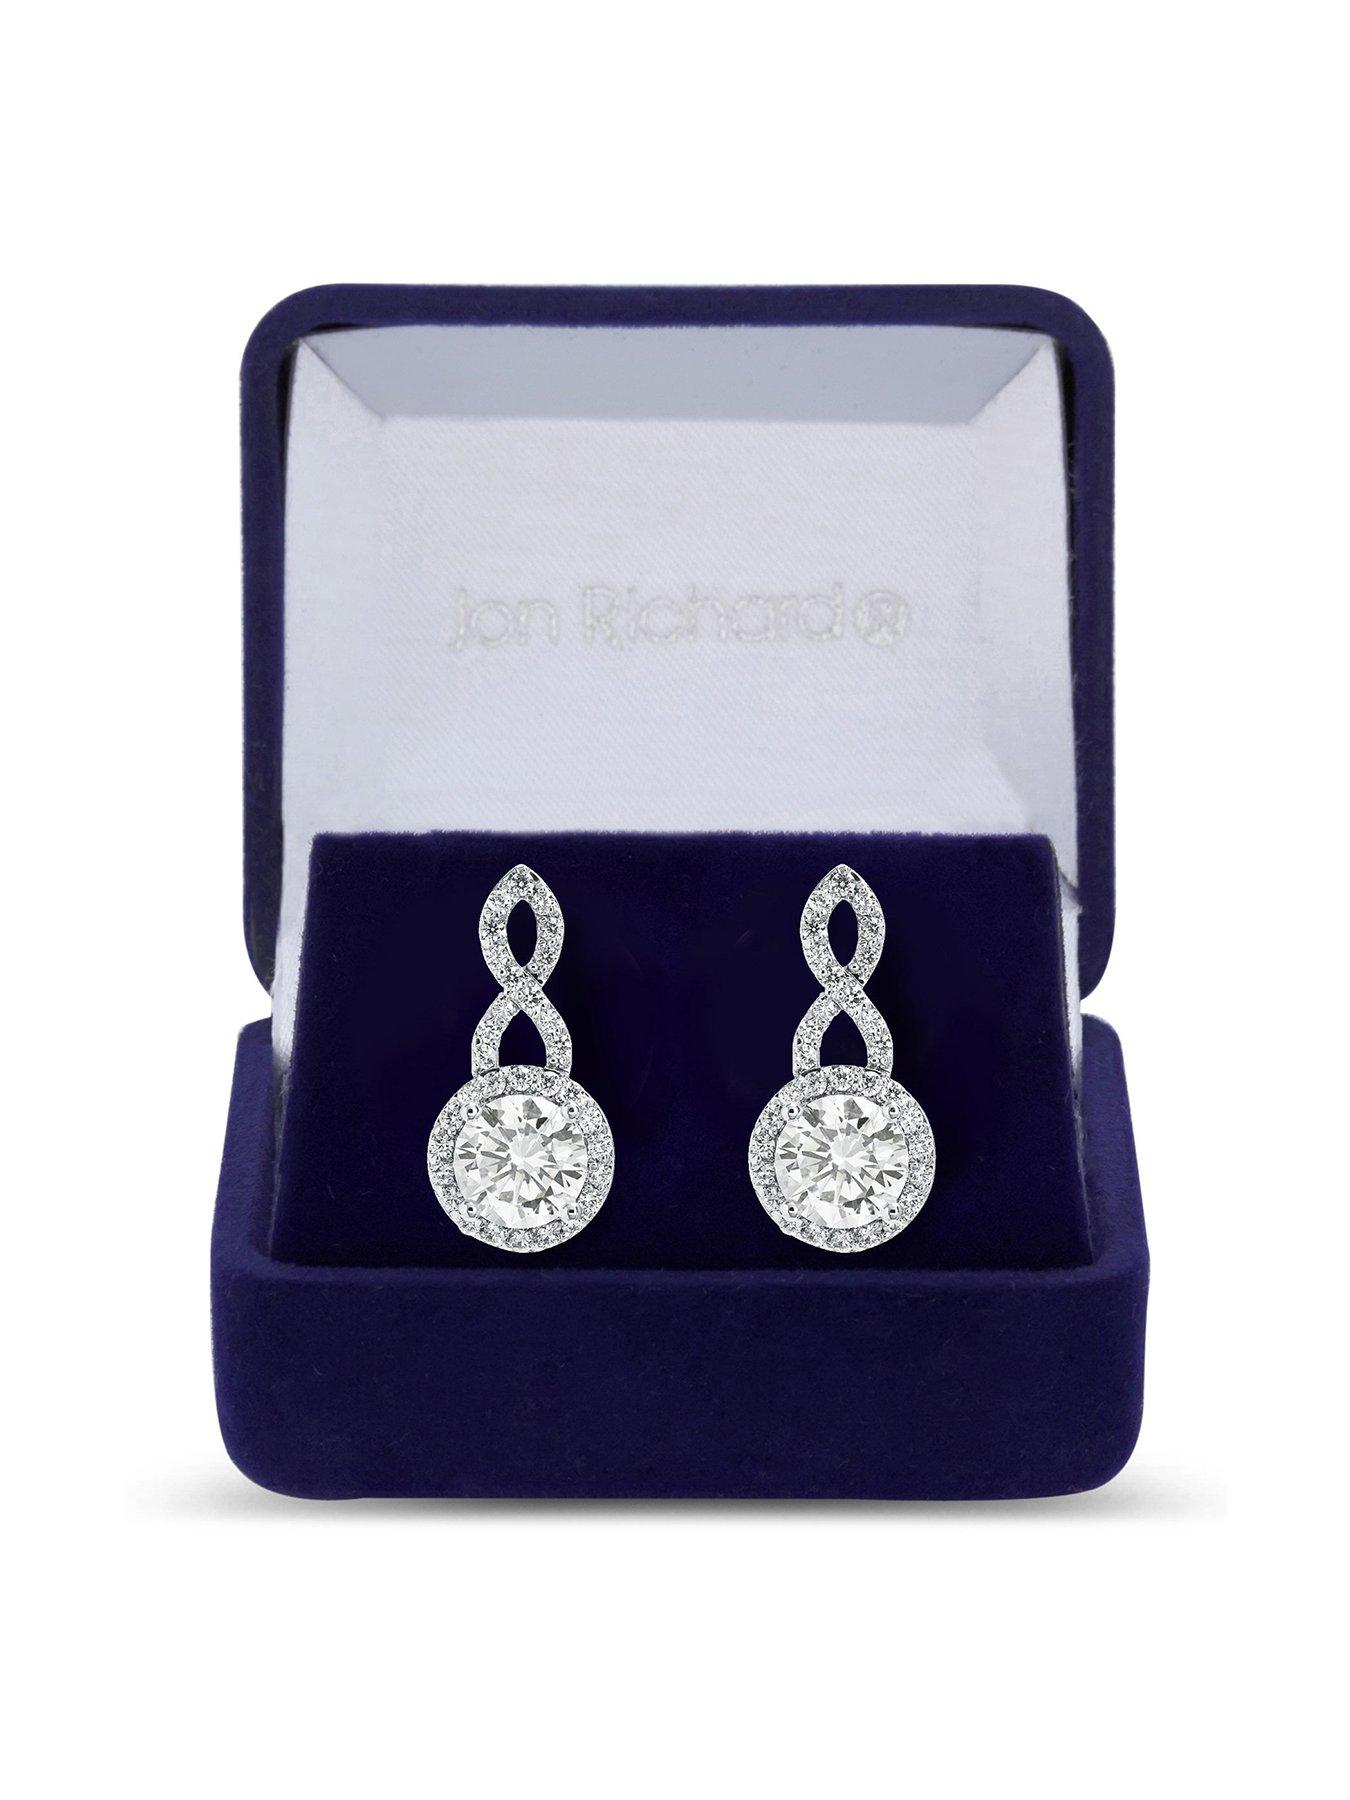  Silver Plated Cubic Zirconia Halo Infinity Crystal Drop Earring - Gift Boxed